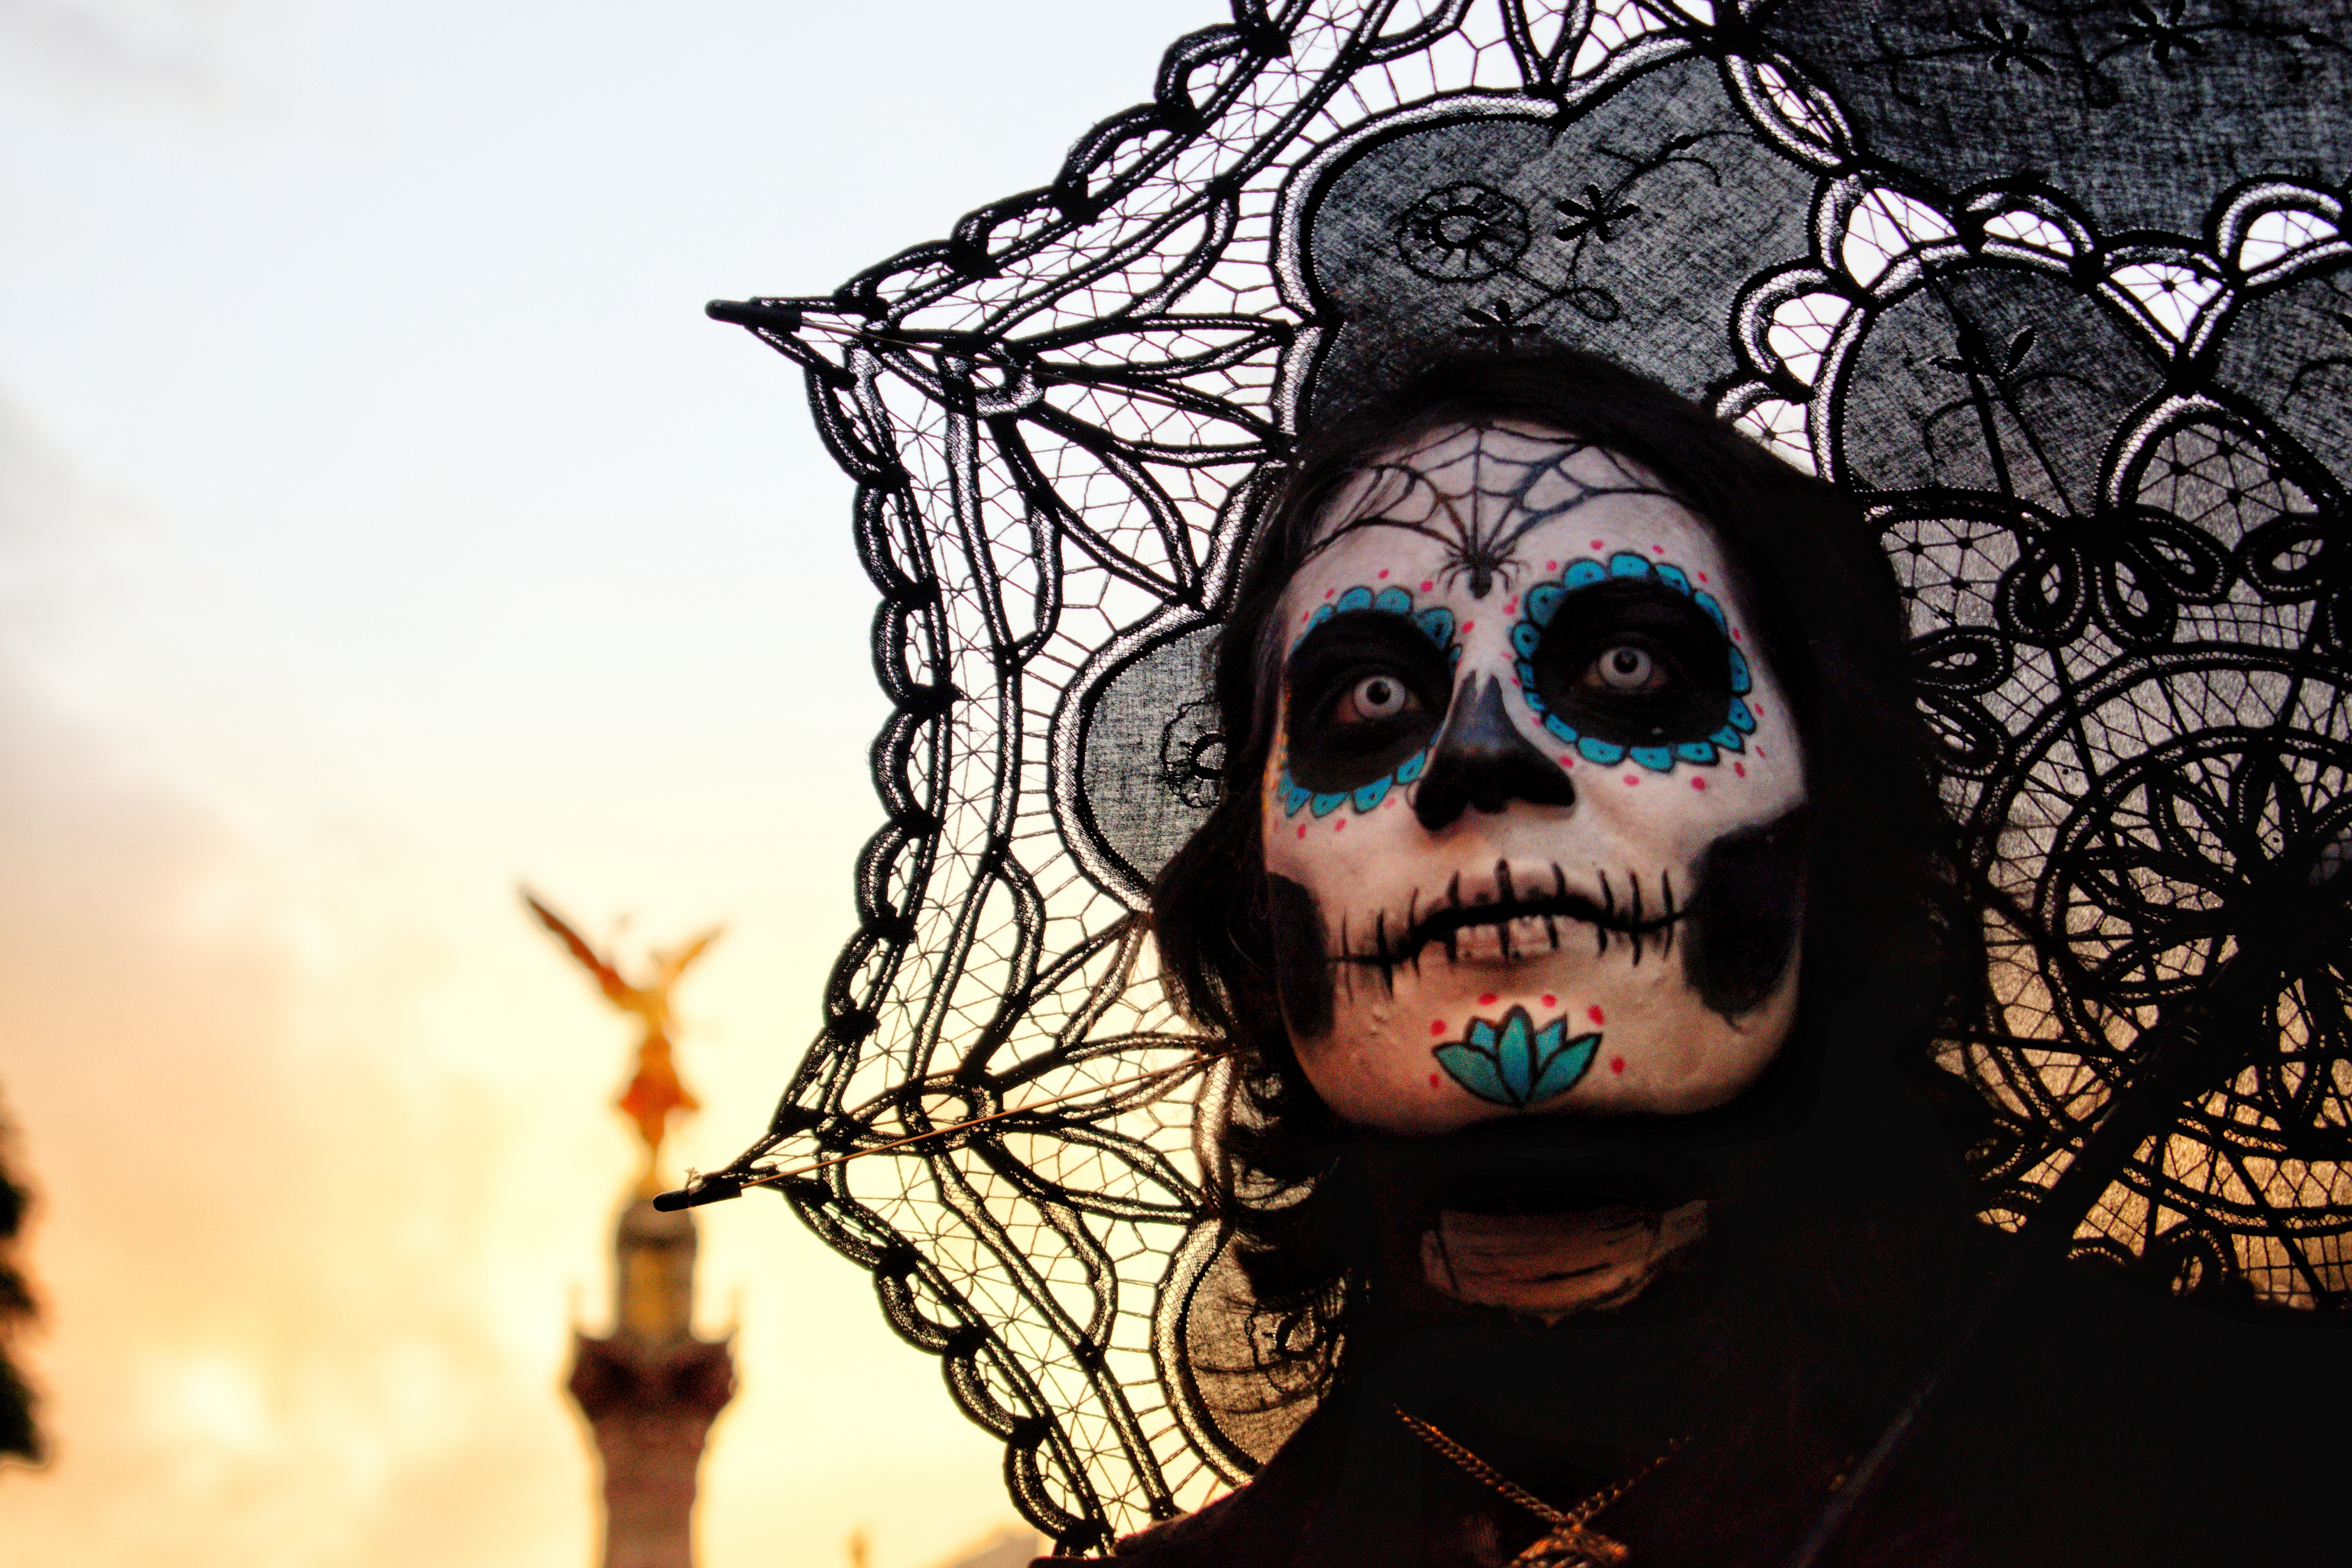 Day of the dead arrives in Mexico